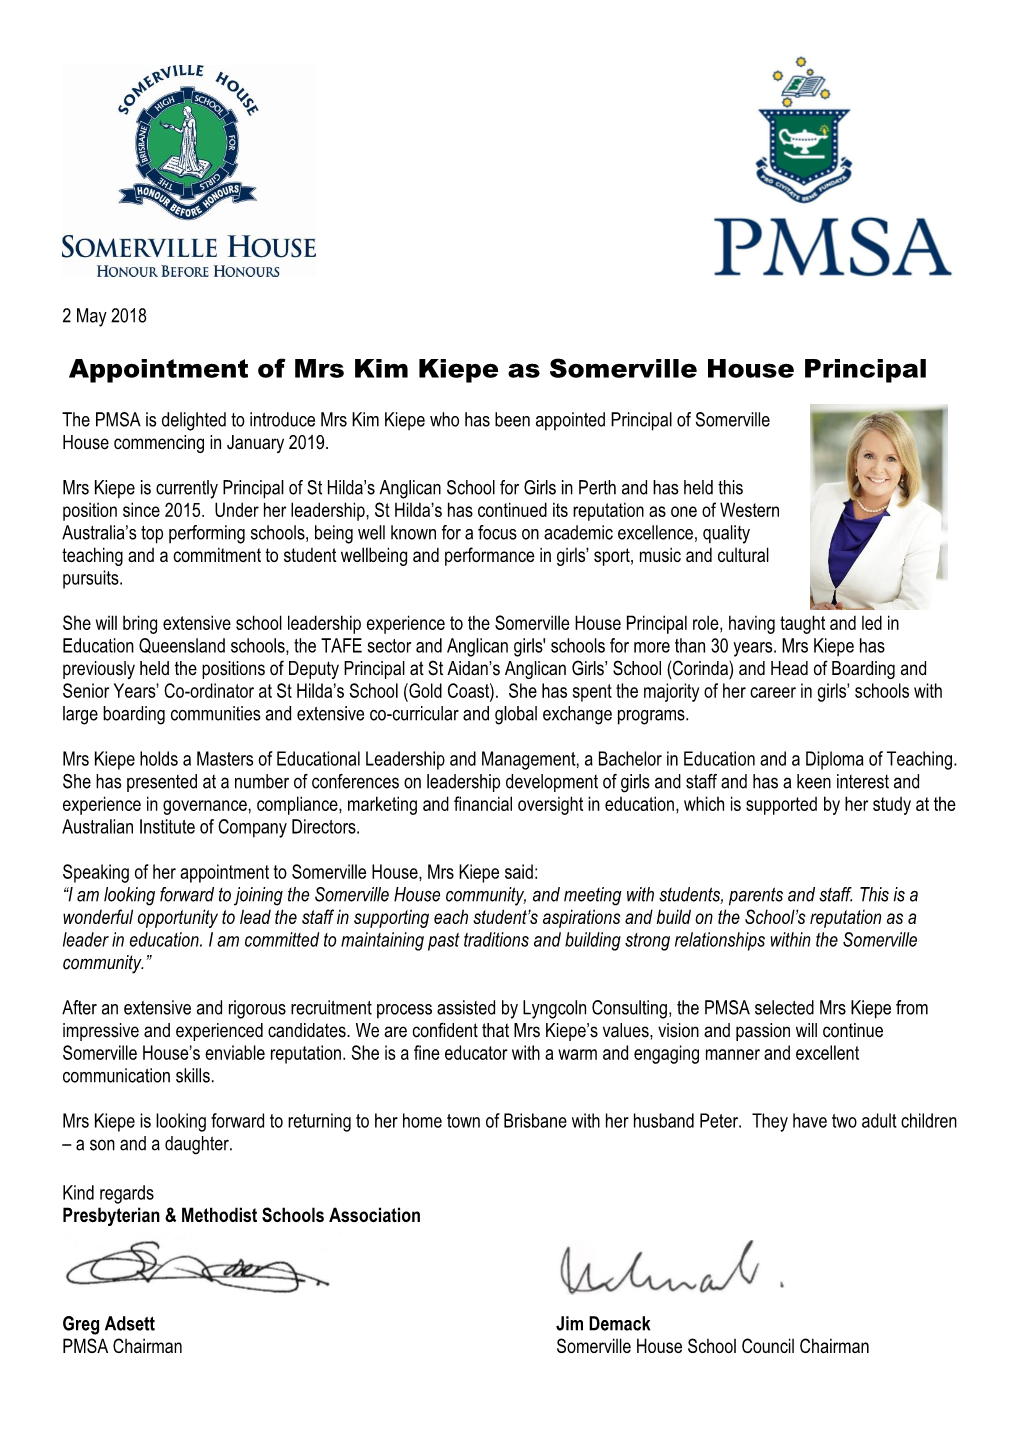 Appointment of Mrs Kim Kiepe As Somerville House Principal